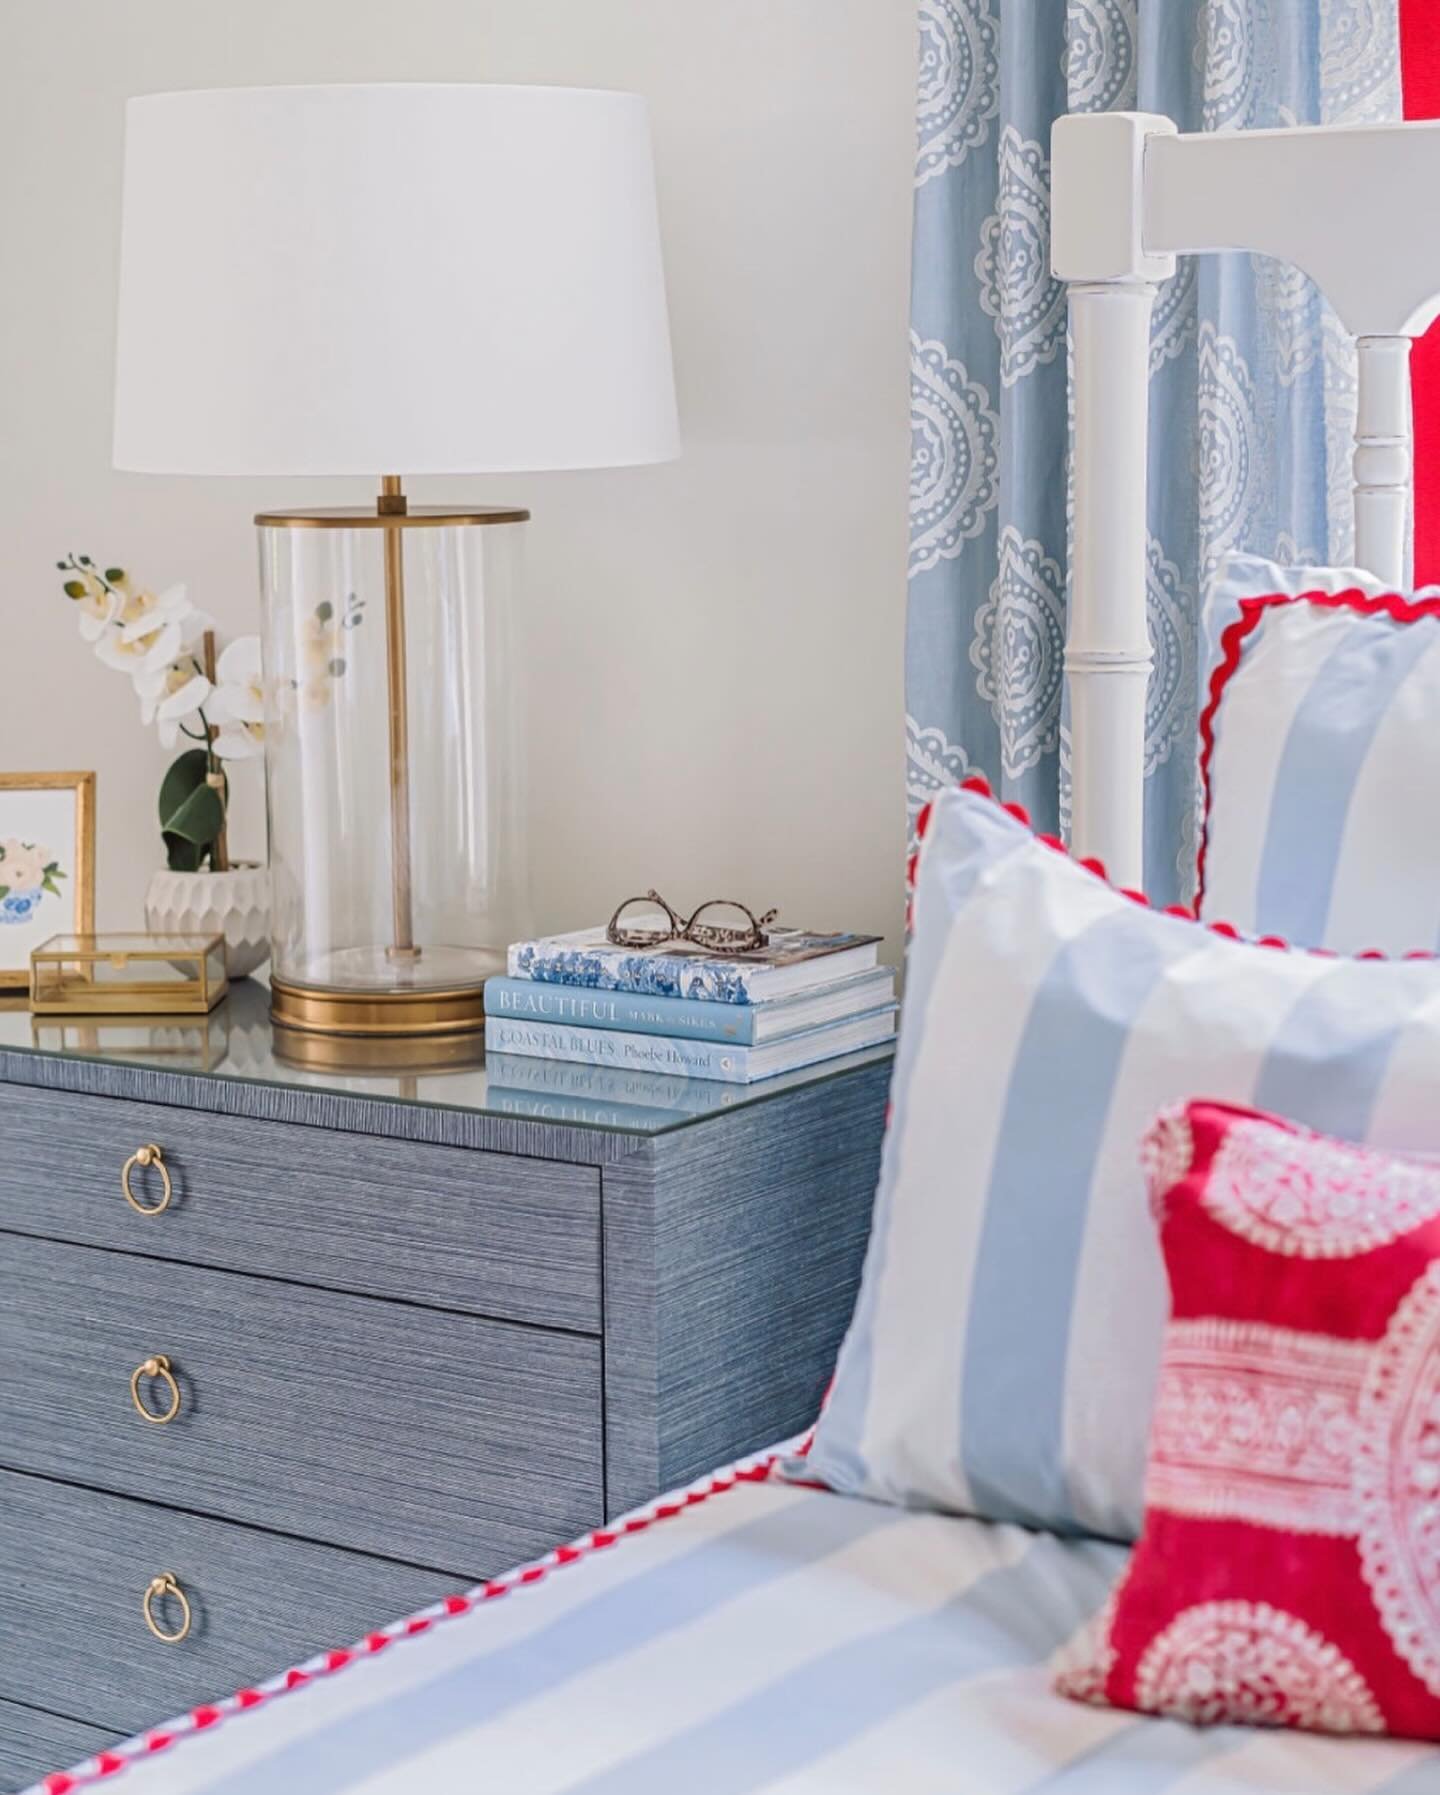 Why two fabulous three drawer chests make the best guestroom bedside tables&hellip;💙💙✨

Not only do they immediately become gorgeous statement pieces in this guestroom but they provide guests ample storage for their stay. You can also keep extra gu